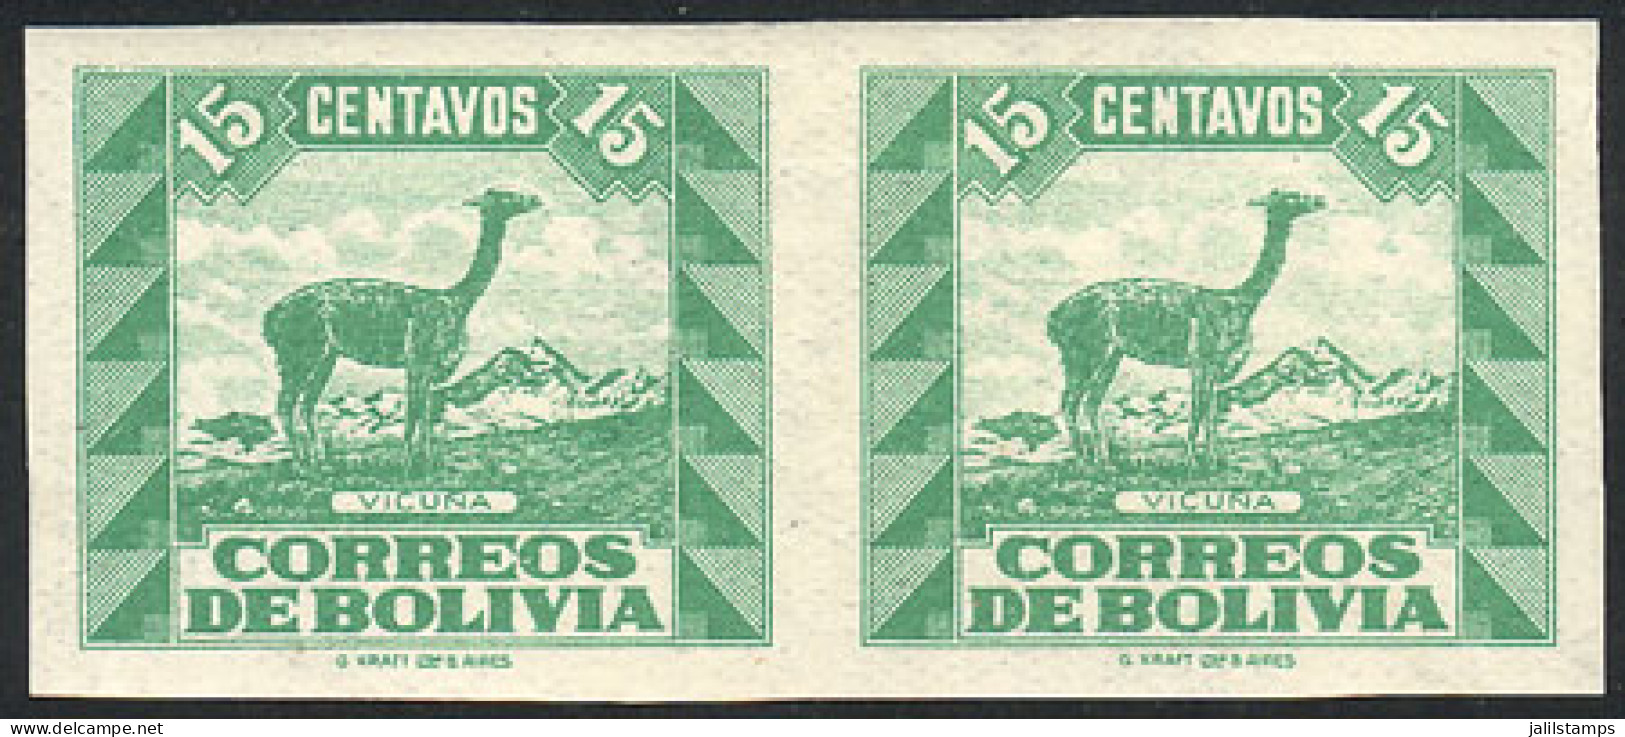 BOLIVIA: Sc.255, 1939 15c. Llama, IMPERFORATE PAIR, Mint Lightly Hinged, Very Fine Quality! - Bolivien